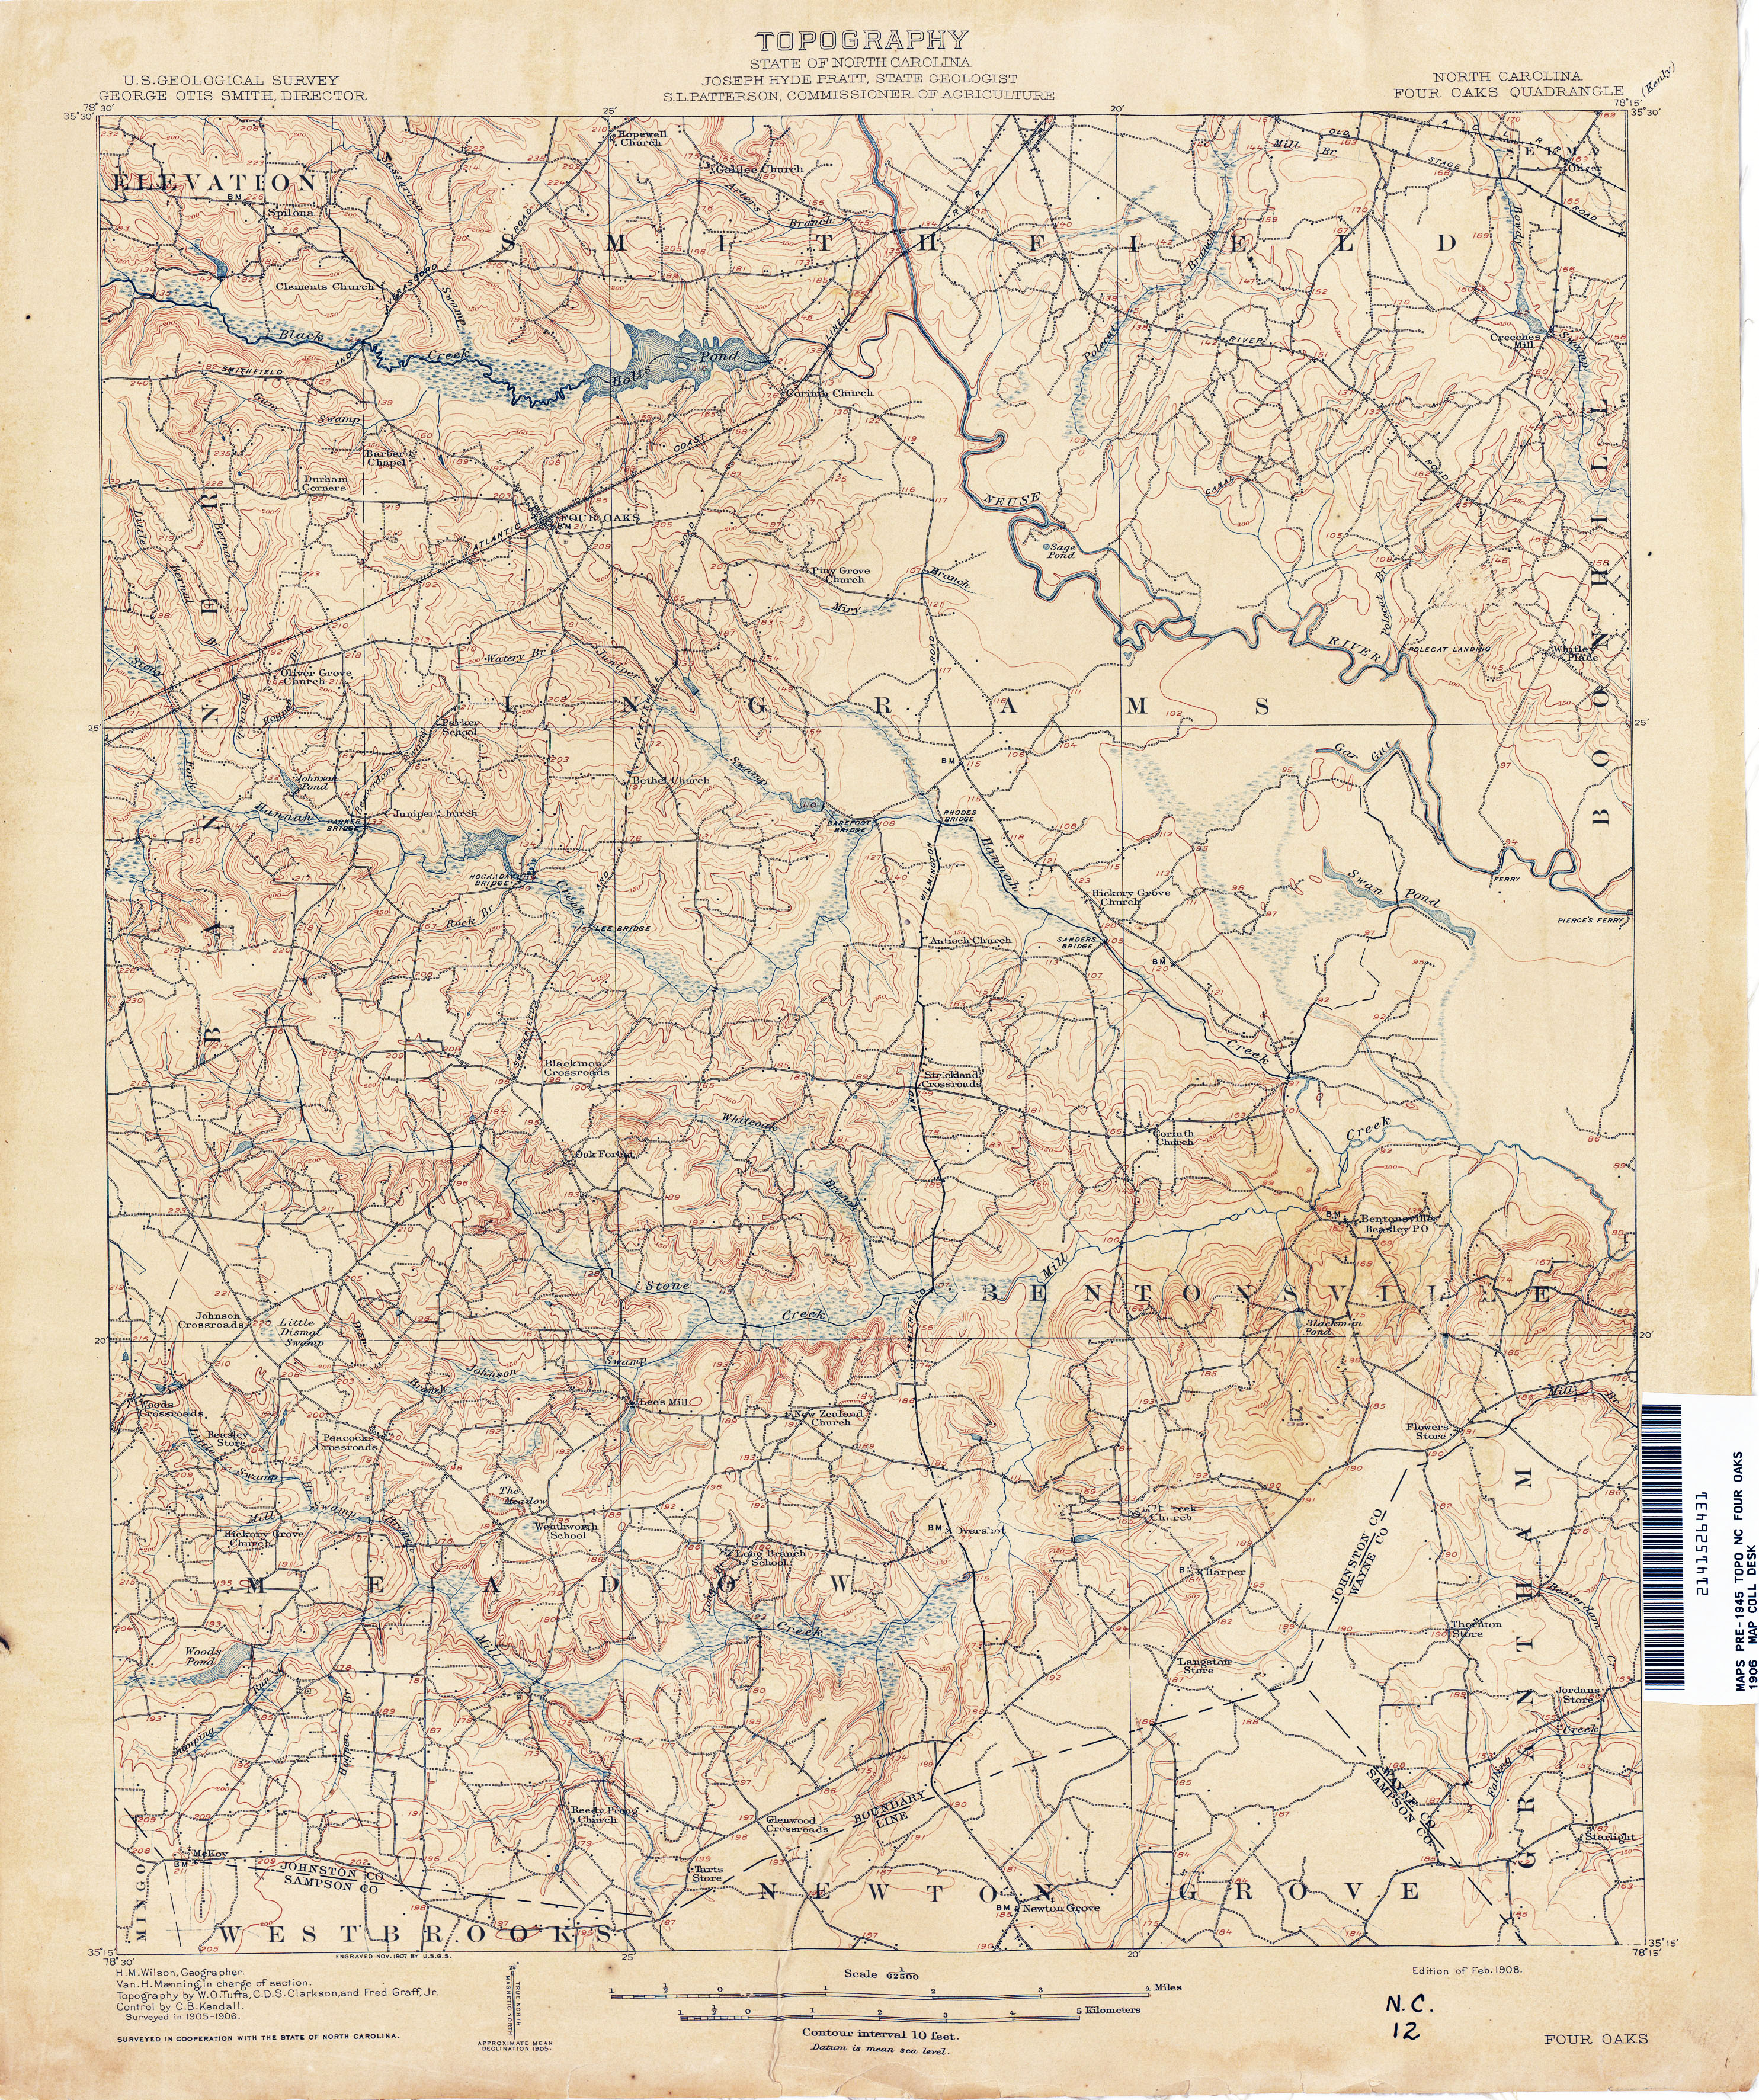 1904 1:62500 Scale Updated 1941 15 X 15 Minute 19.7 x 16.5 in YellowMaps Edenton NC topo map Historical 